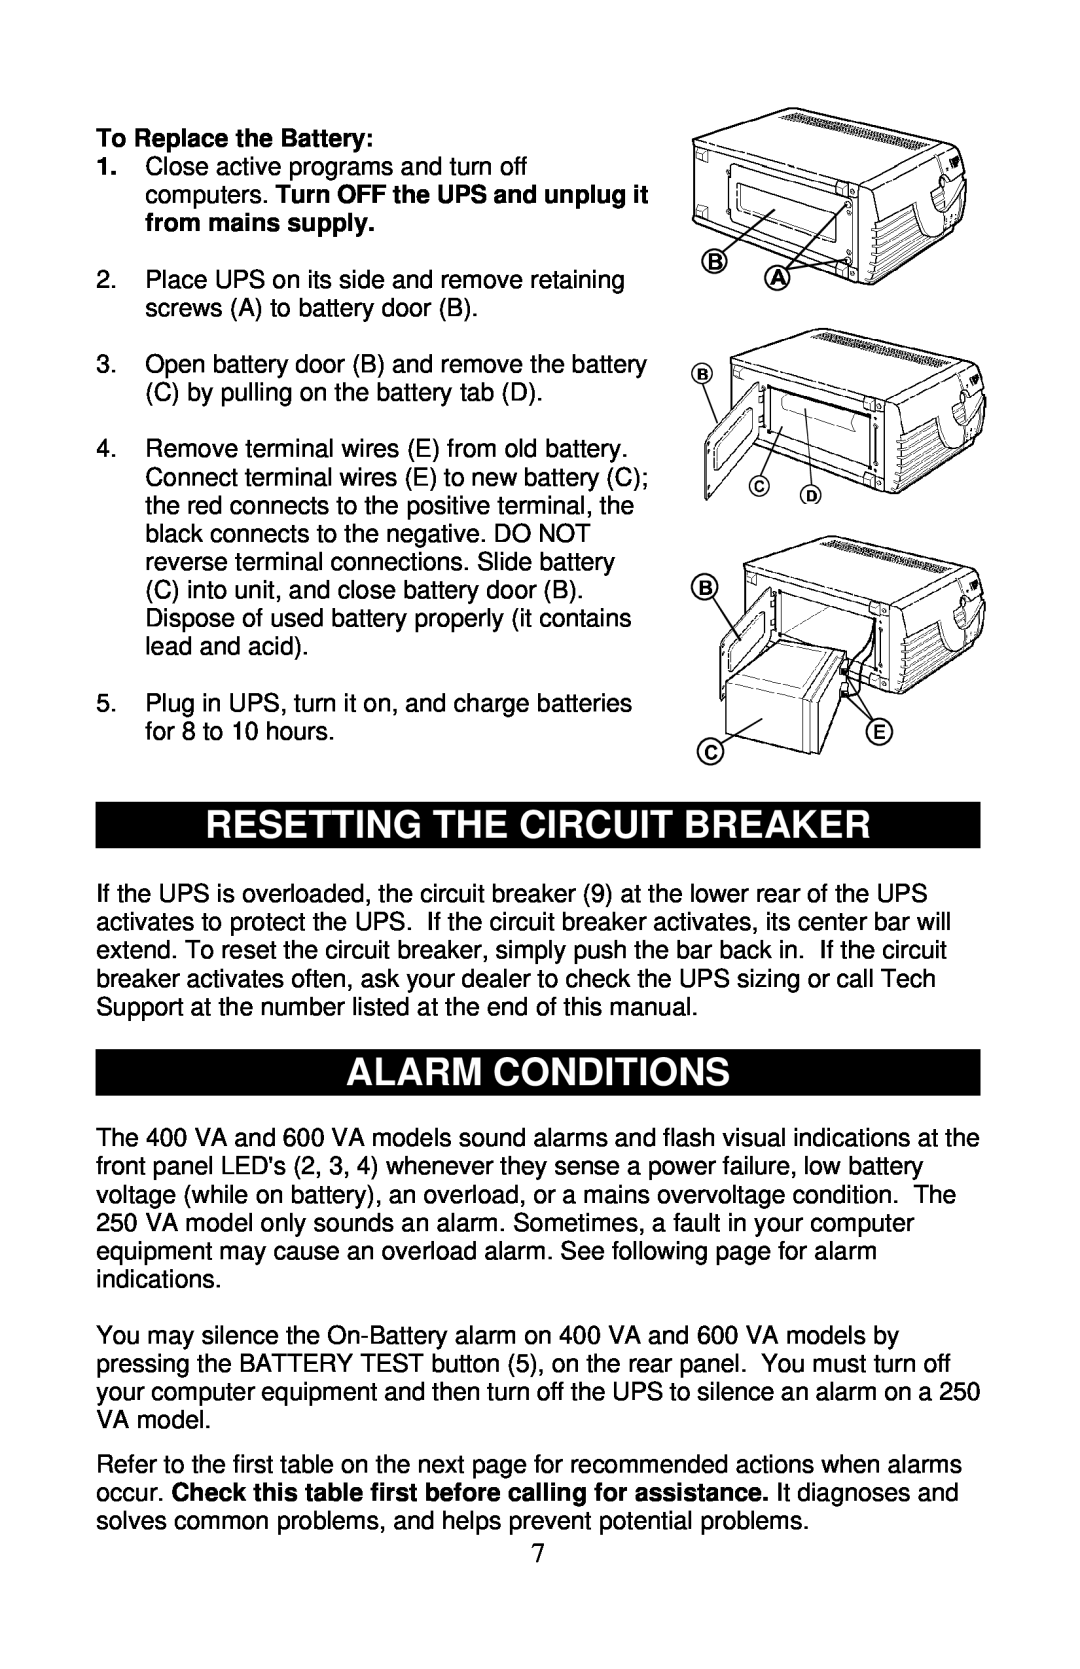 Liebert PS250-50S, PS400-50S, PS600-50S user manual Resetting The Circuit Breaker, Alarm Conditions, To Replace the Battery 